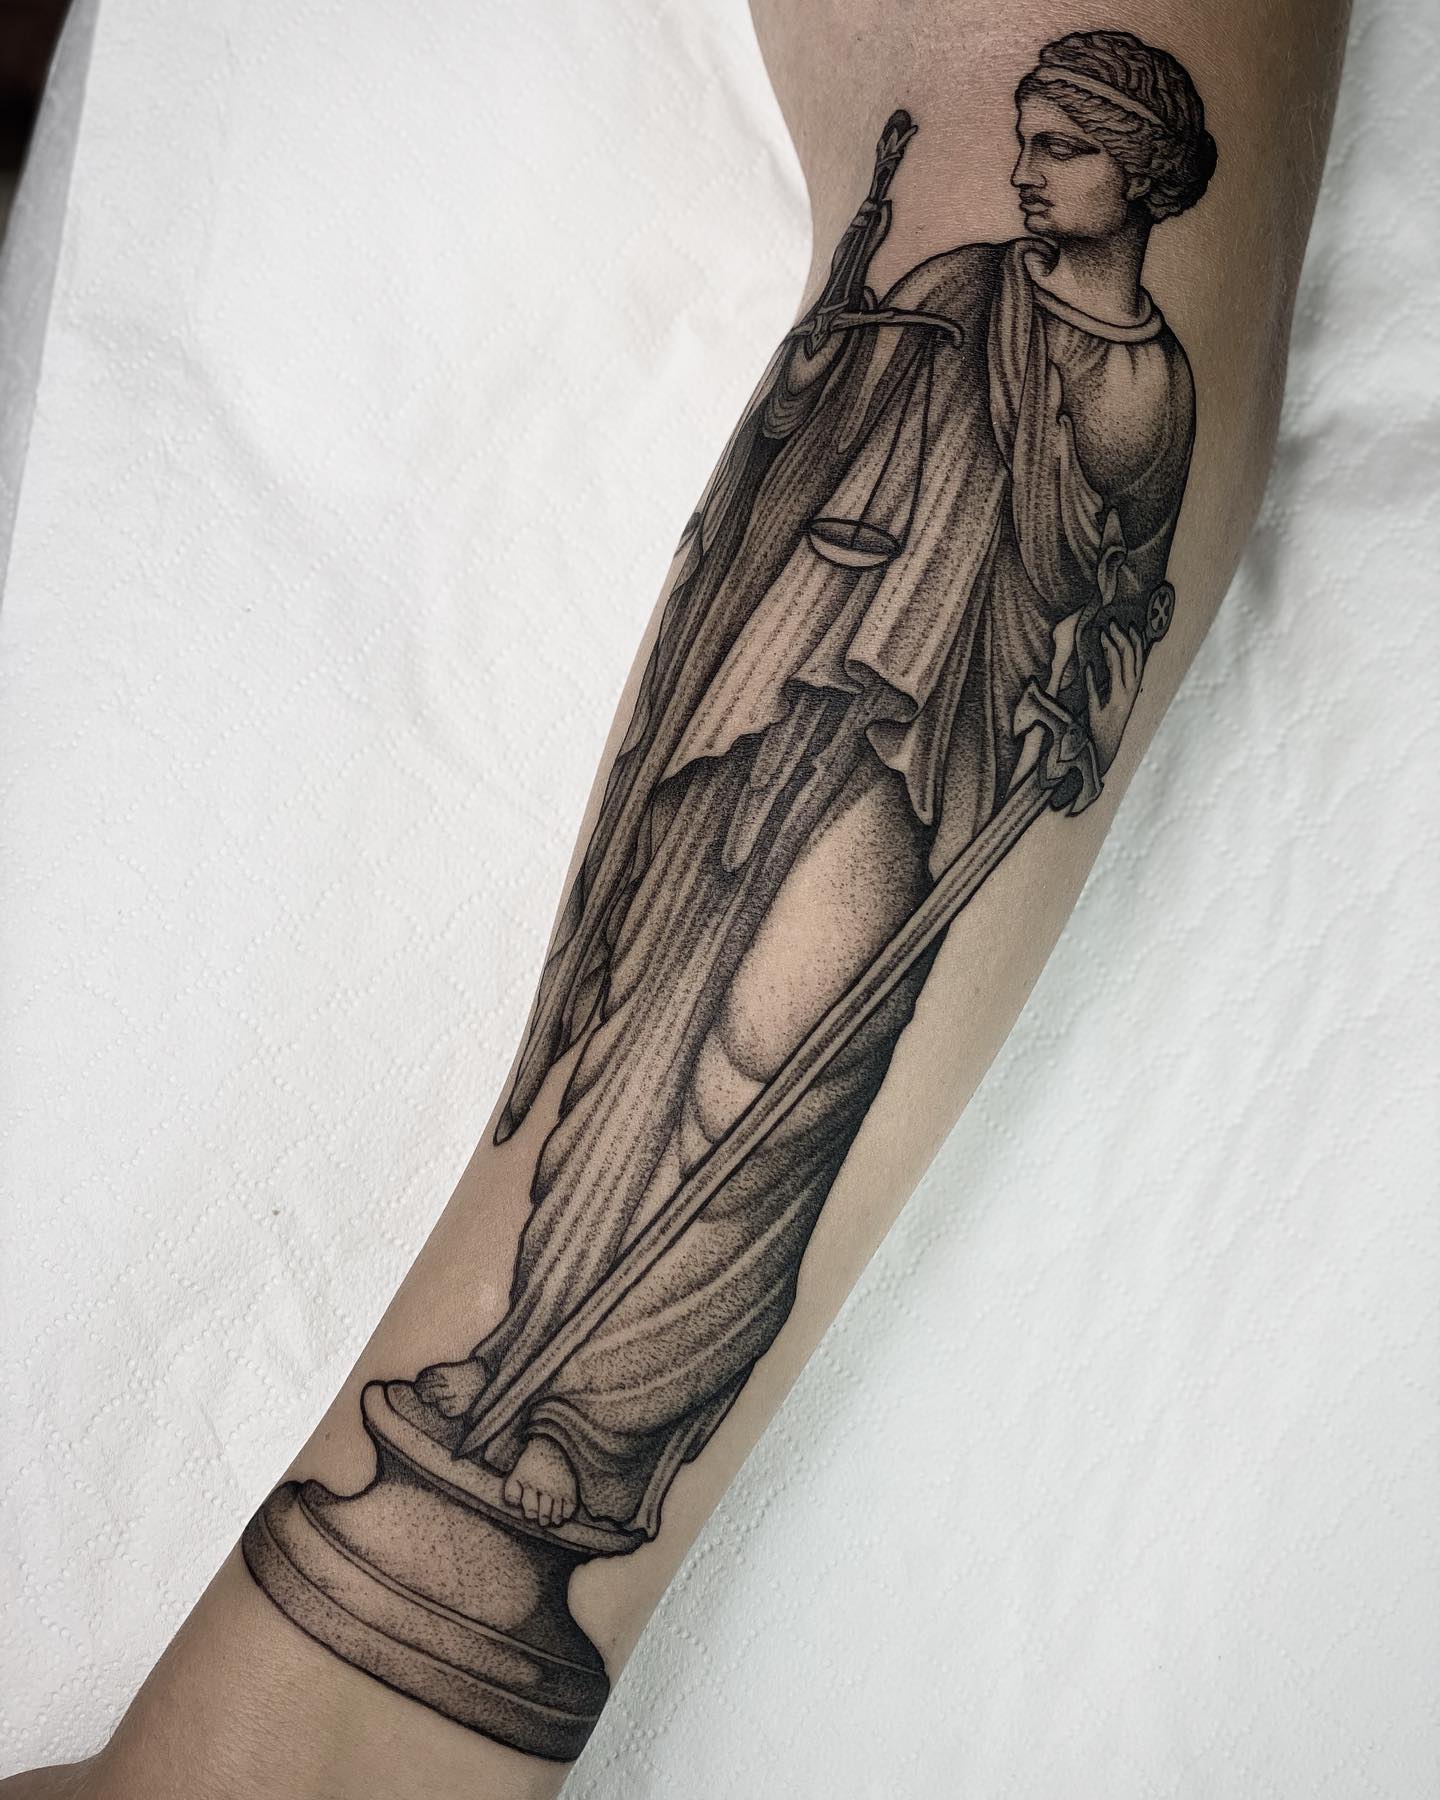  Lady Justice has always been a favorite figure for many things. How about getting a tattoo of it?